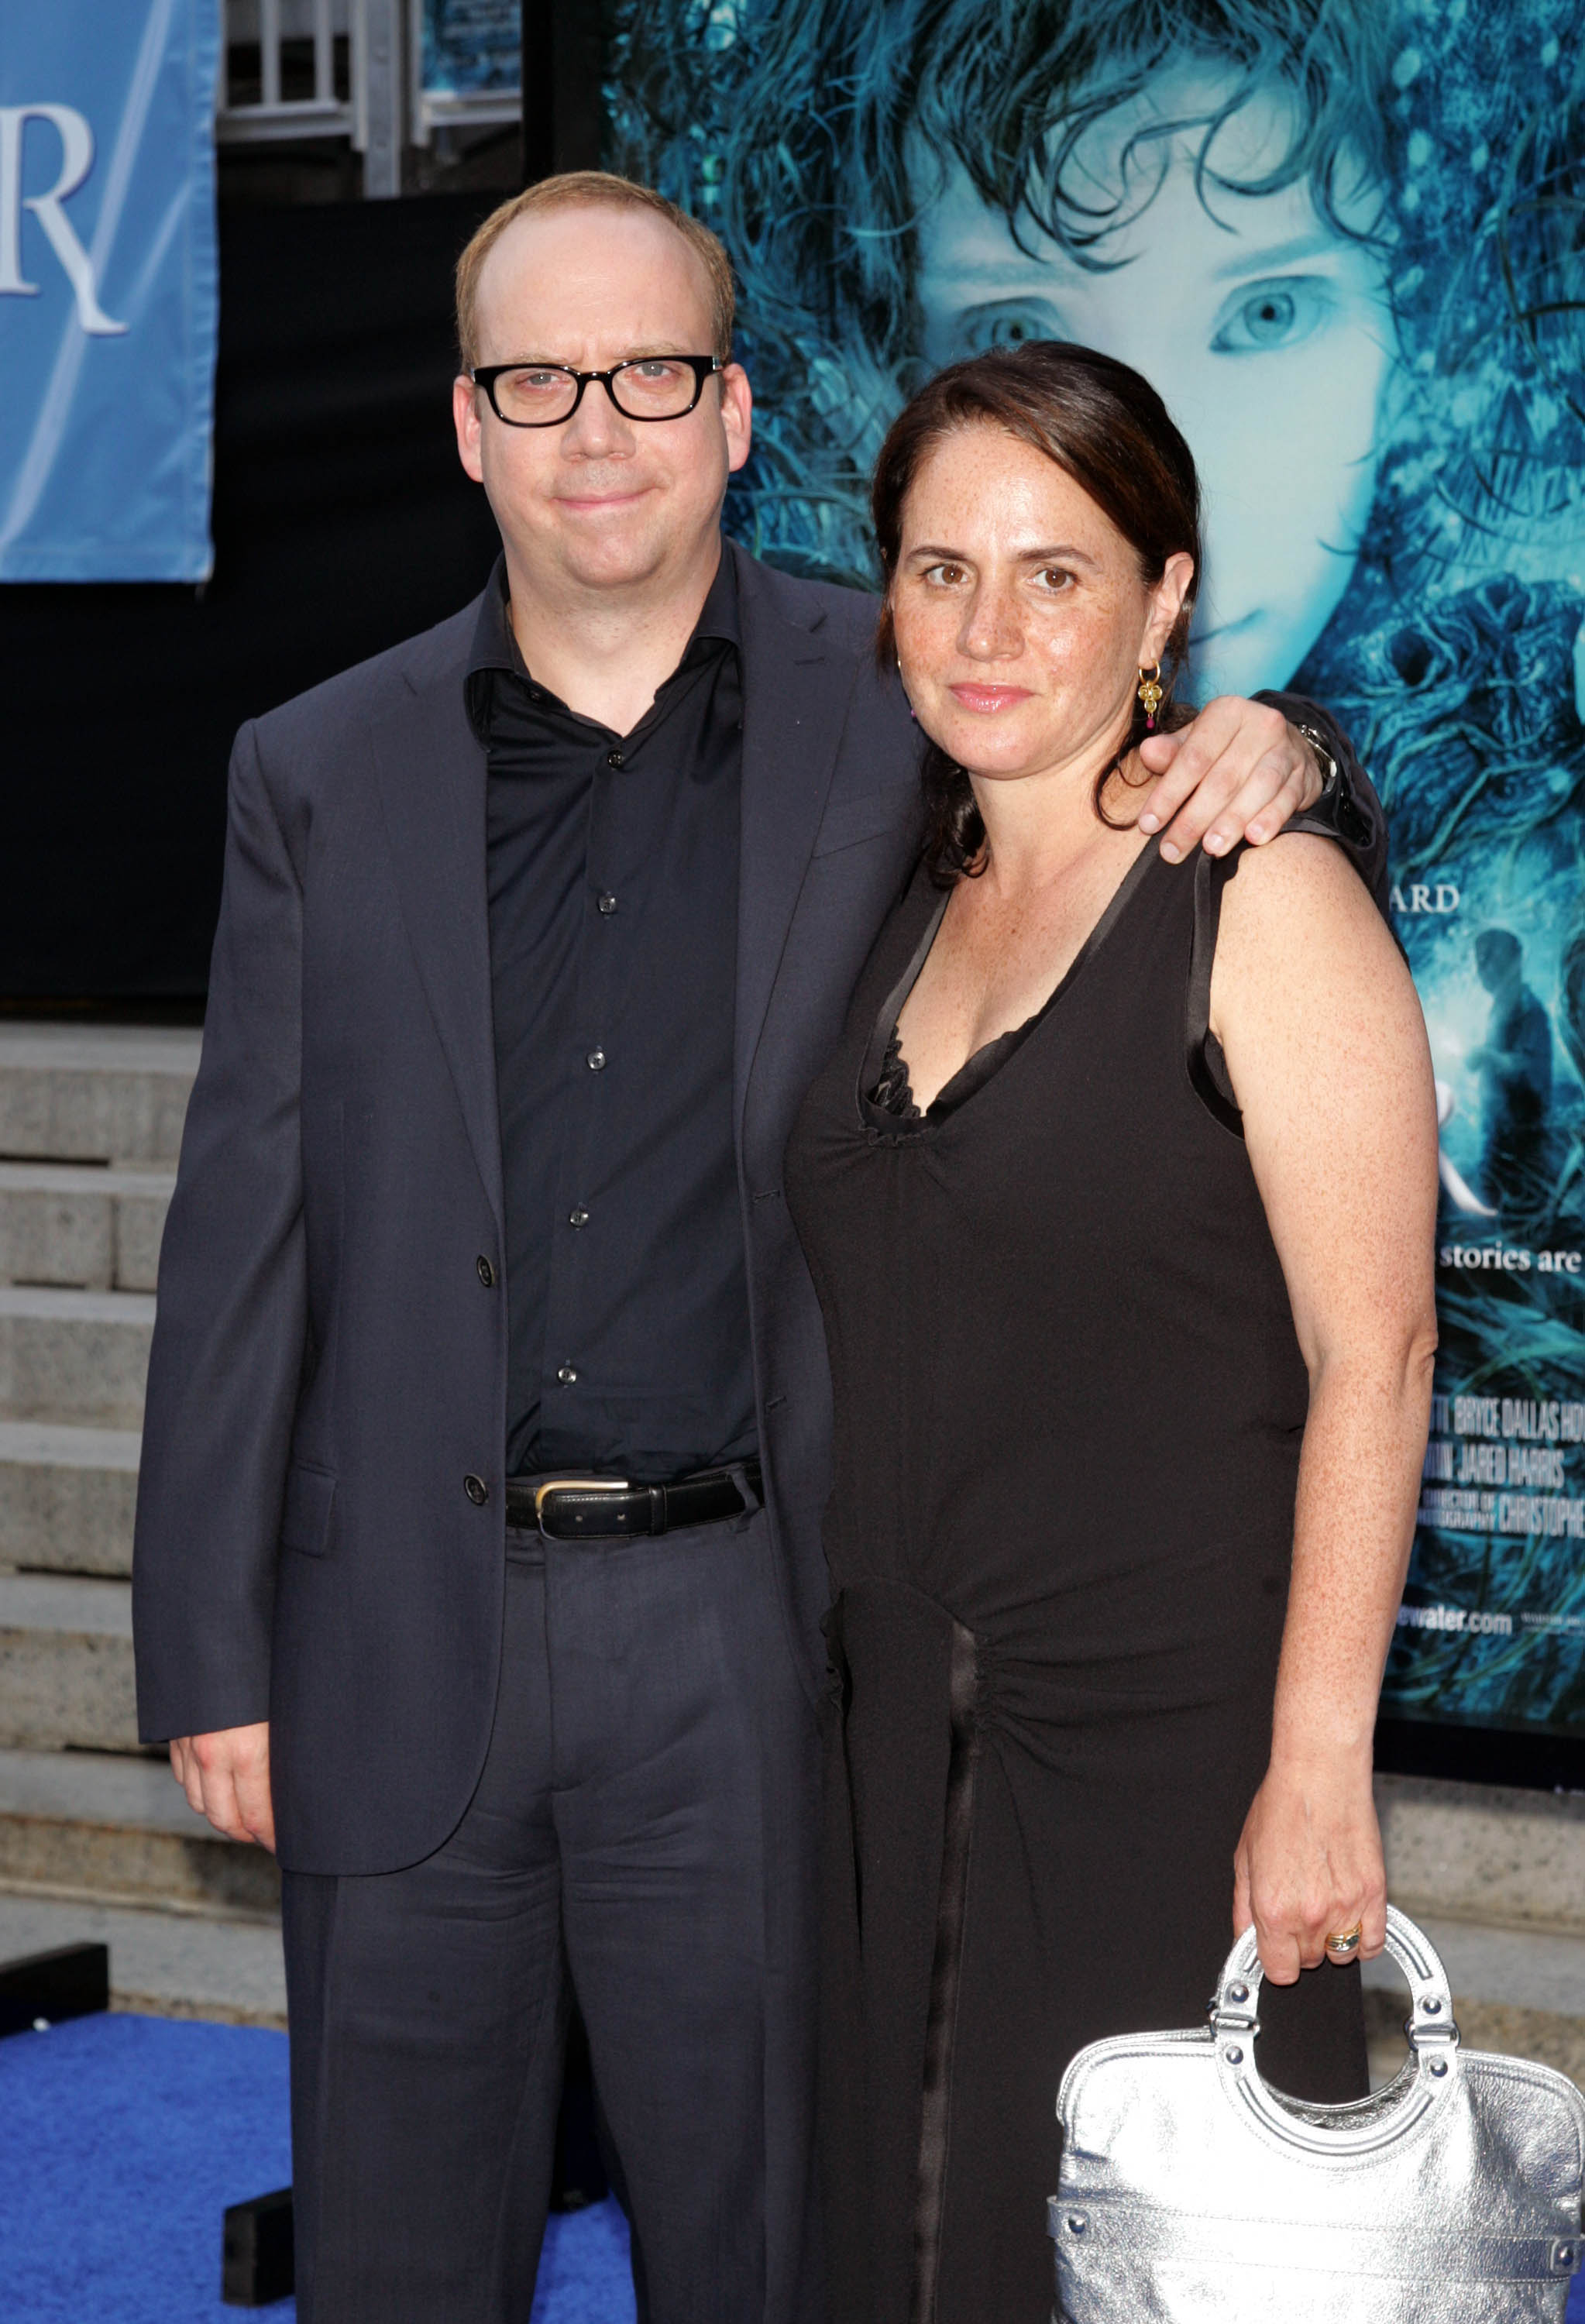 Paul Giamatti and Elizabeth Cohen Giamatti attend the "Lady in the Water" New York Premiere-Outside Arrivals at the American Museum of Natural History on July 17, 2006, in New York City, New York. | Source: Getty Images